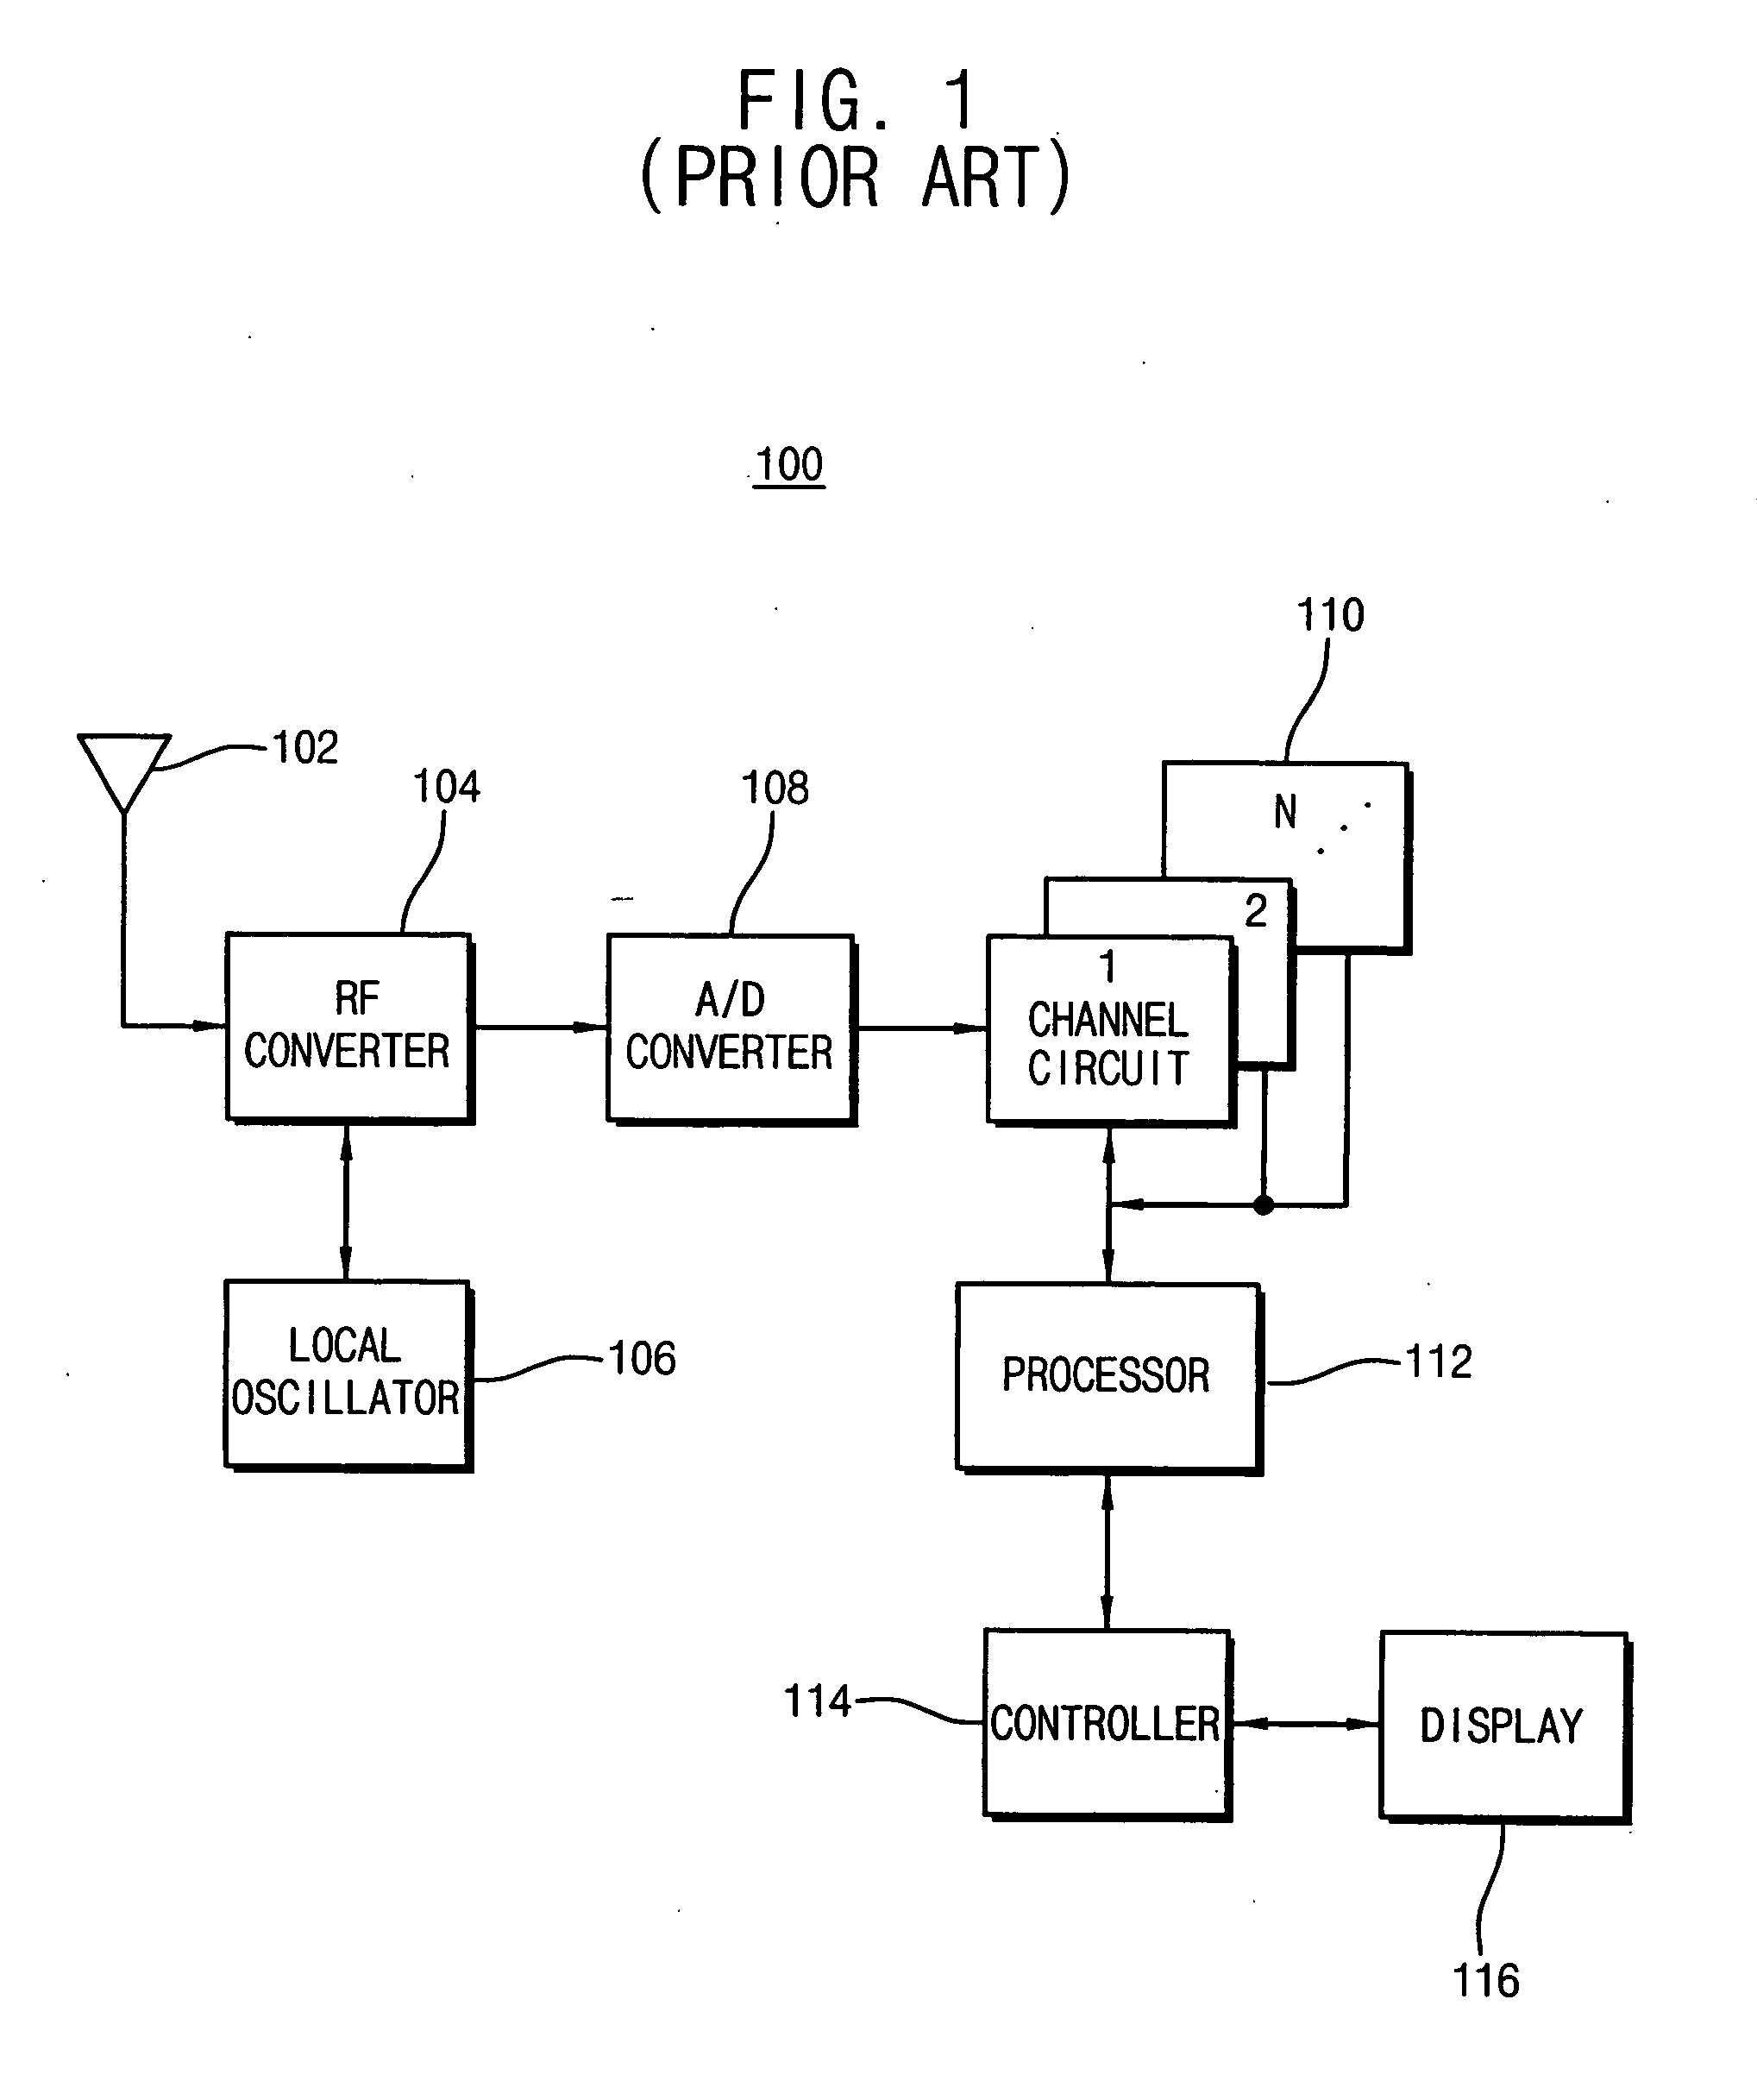 Bit down-scaling apparatus and method, GPS synchronization acquisition method, and GPS receiver